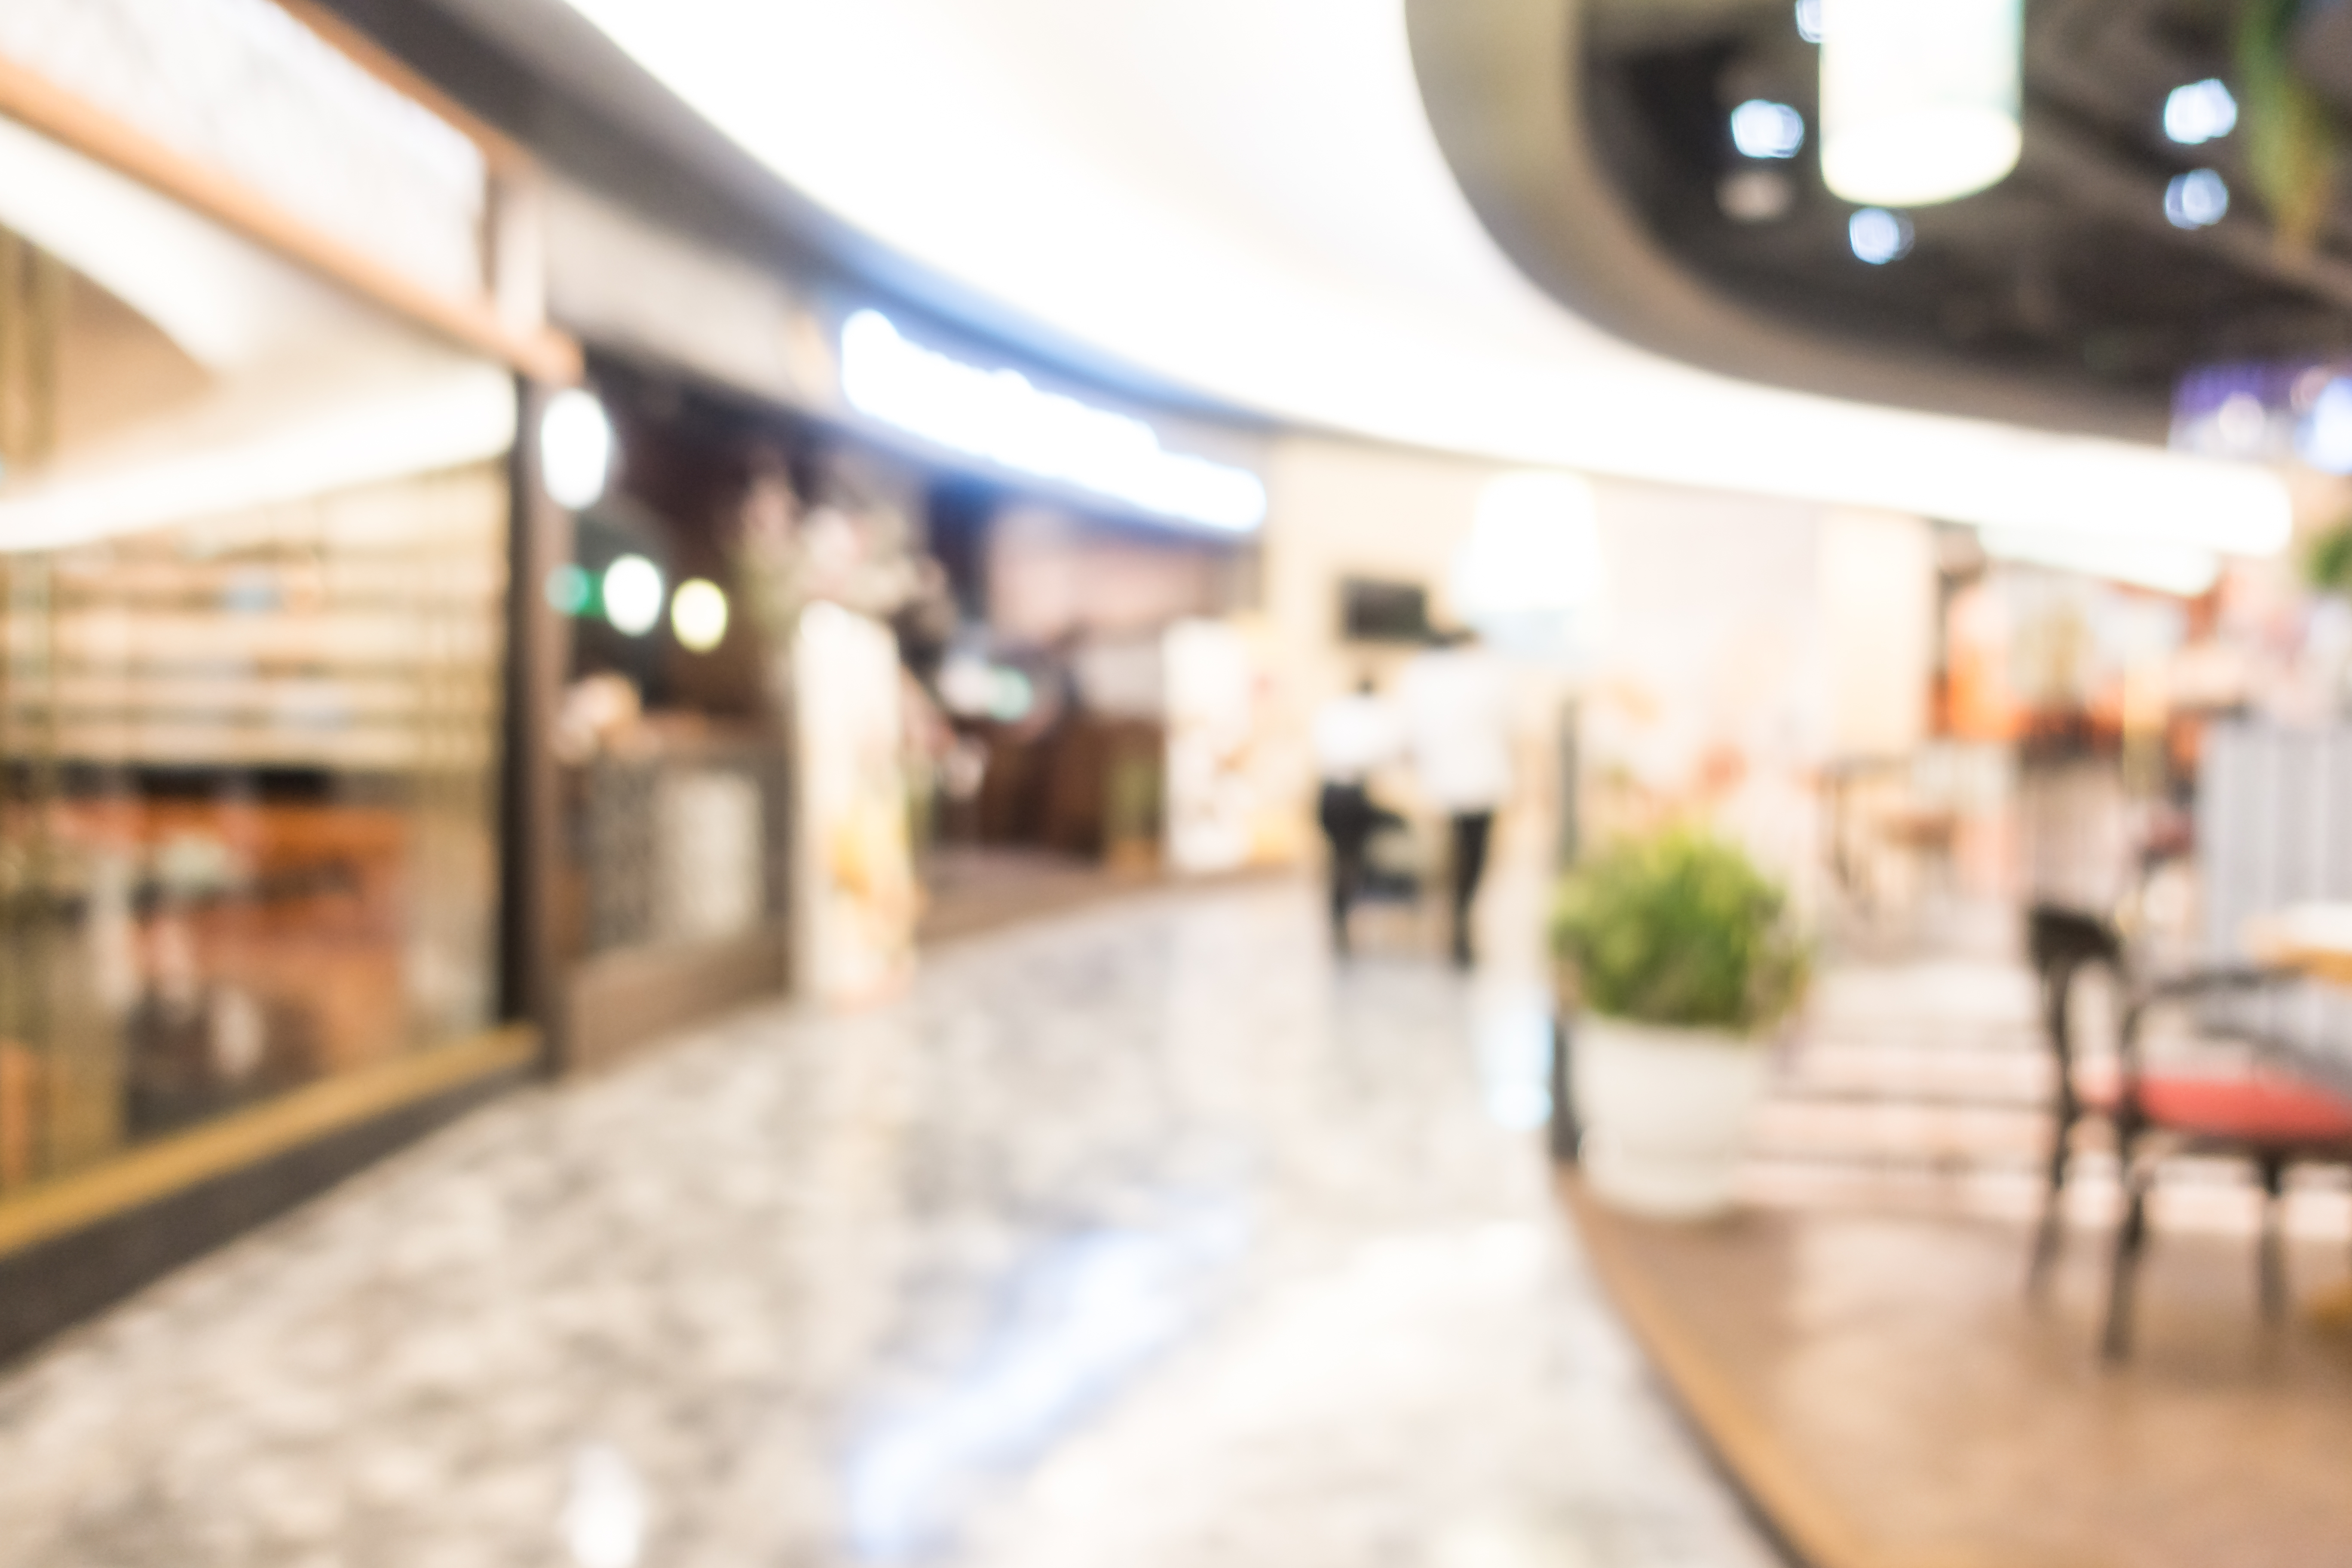 What Tenants Want in a Retail Center Today